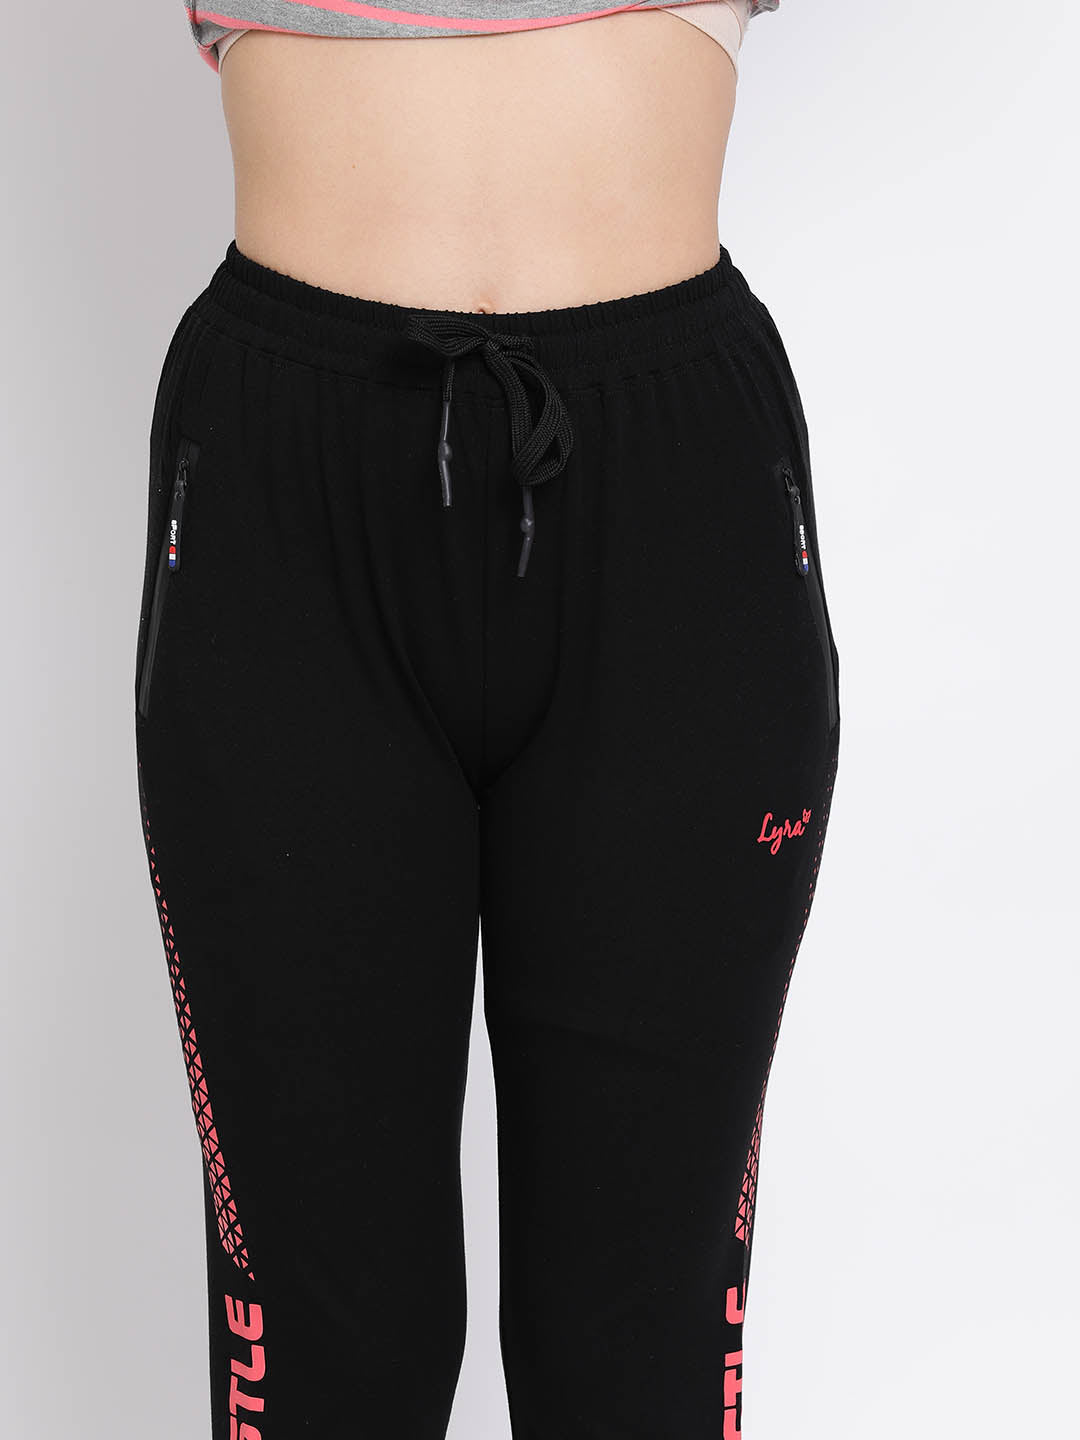 LYRA Women's Track Pants Track_310_Persian Red and Black_Small : Amazon.in:  Clothing & Accessories